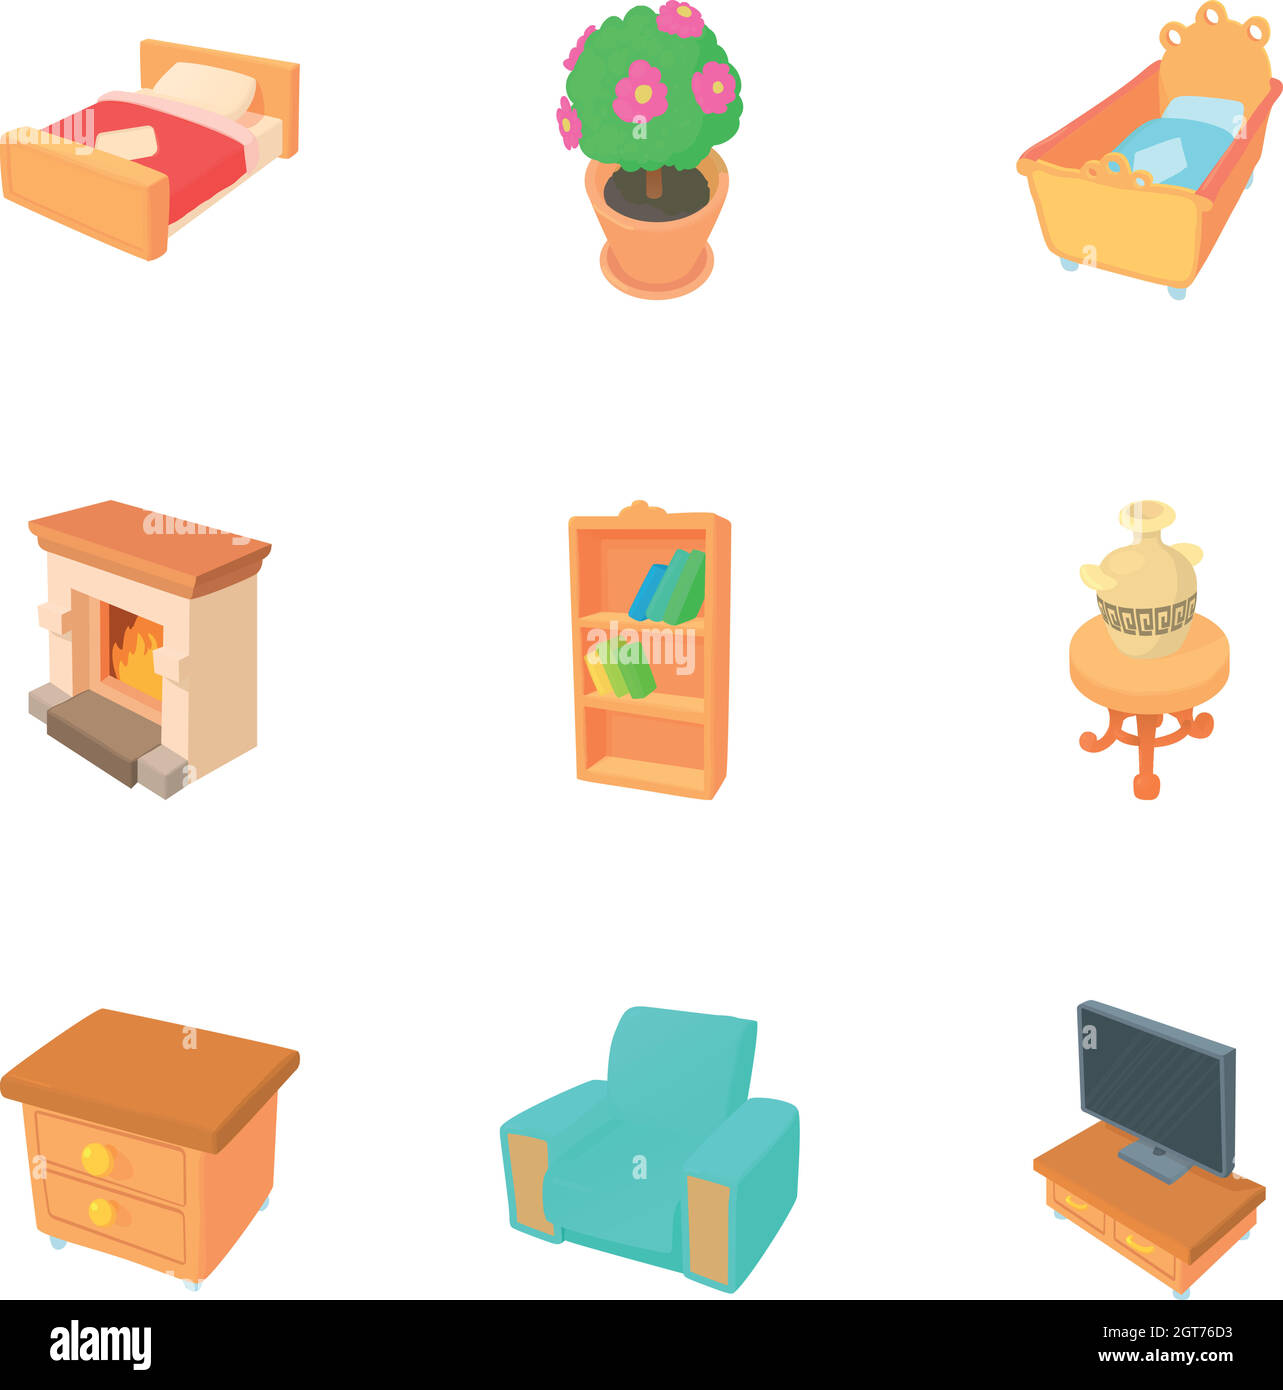 Home furnishings icons set, cartoon style Stock Vector